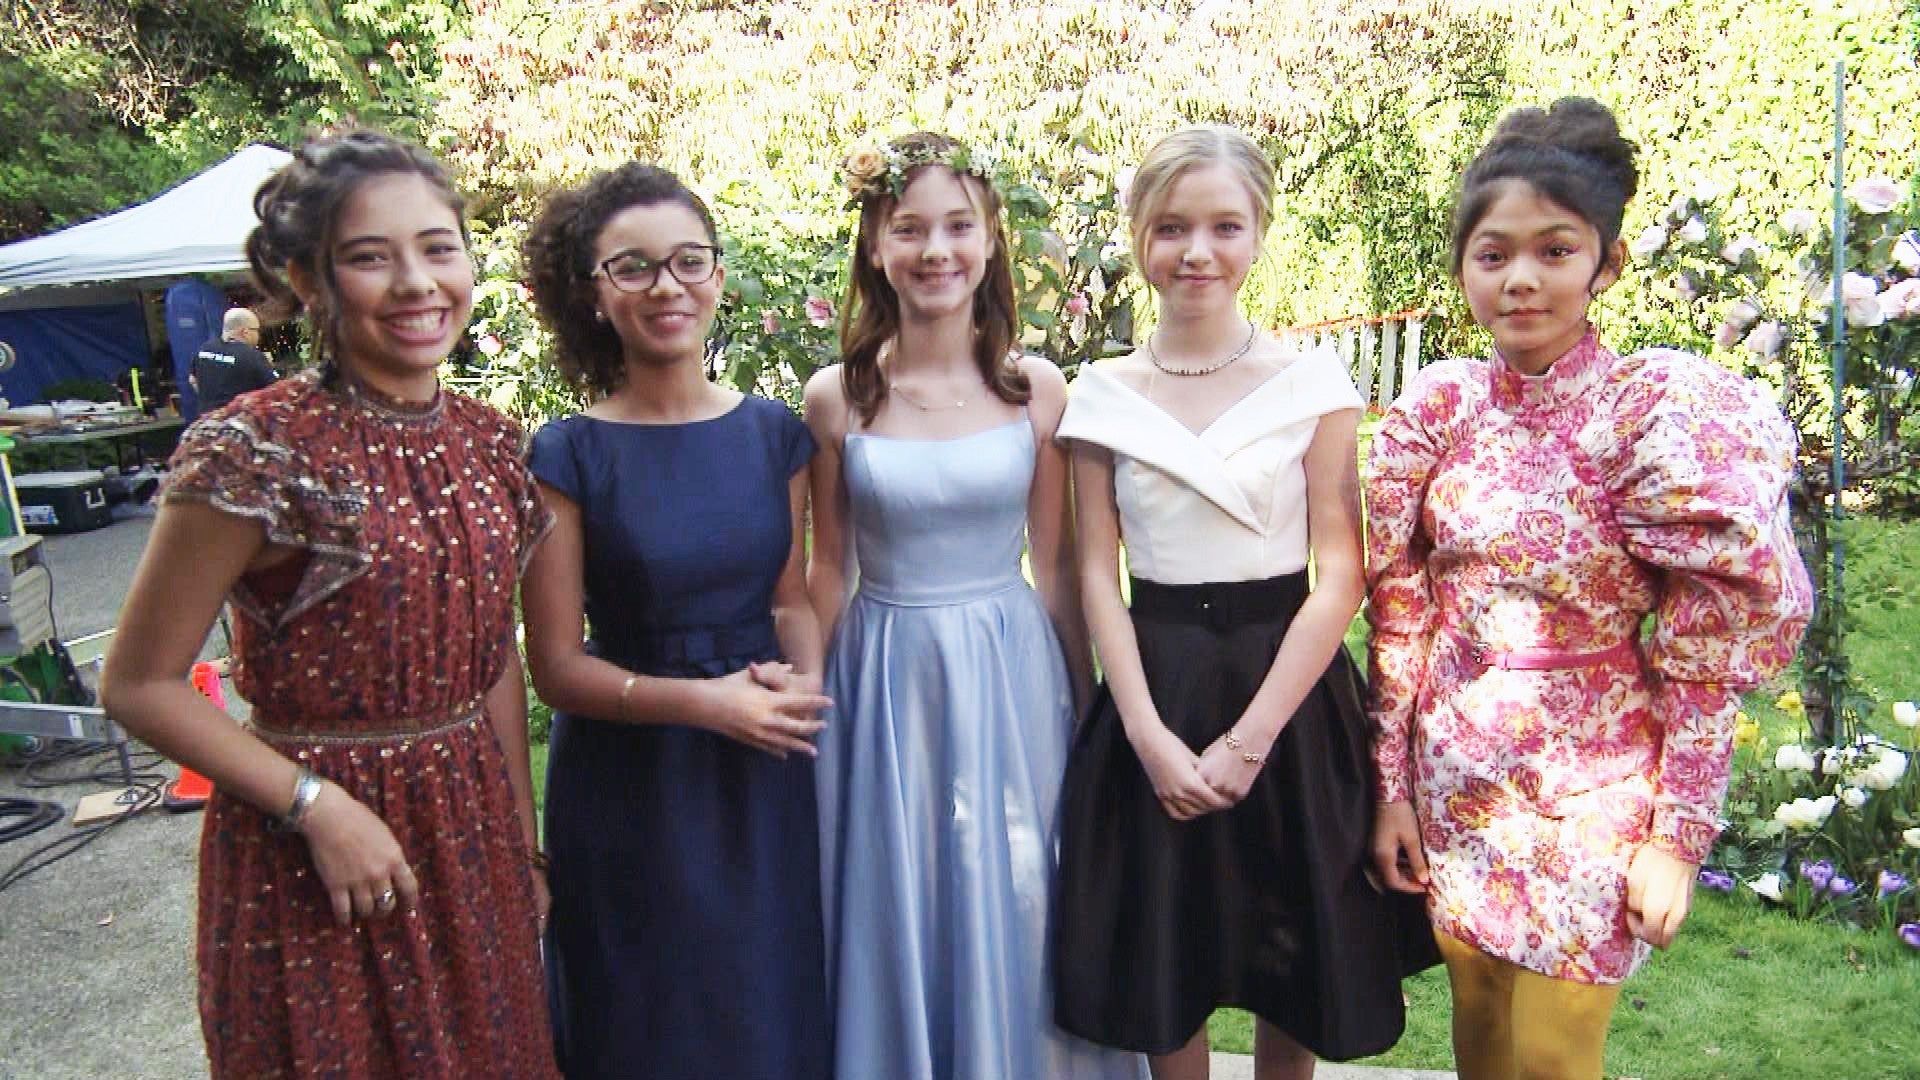 Baby Sitters Club' Costume Designer Secretly Paid Homage To Iconic